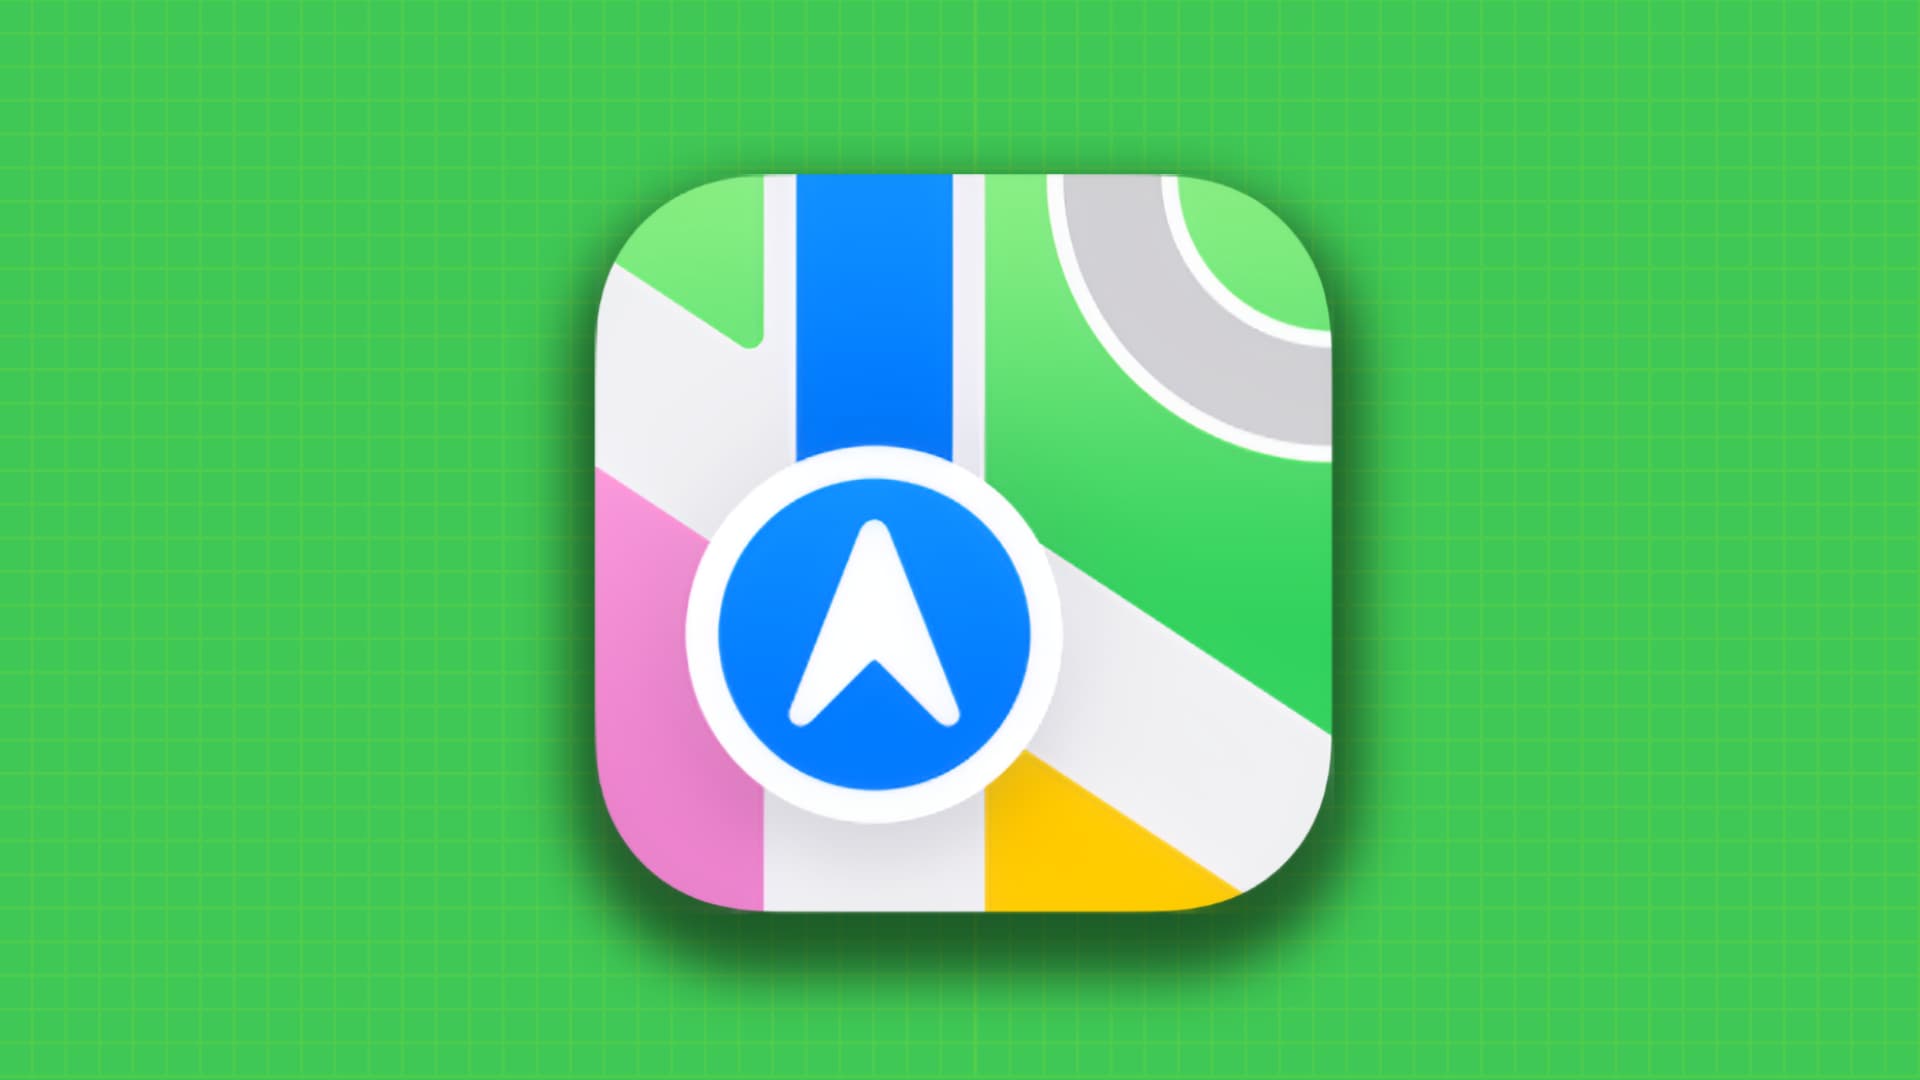 Apple Maps app icon on a green background